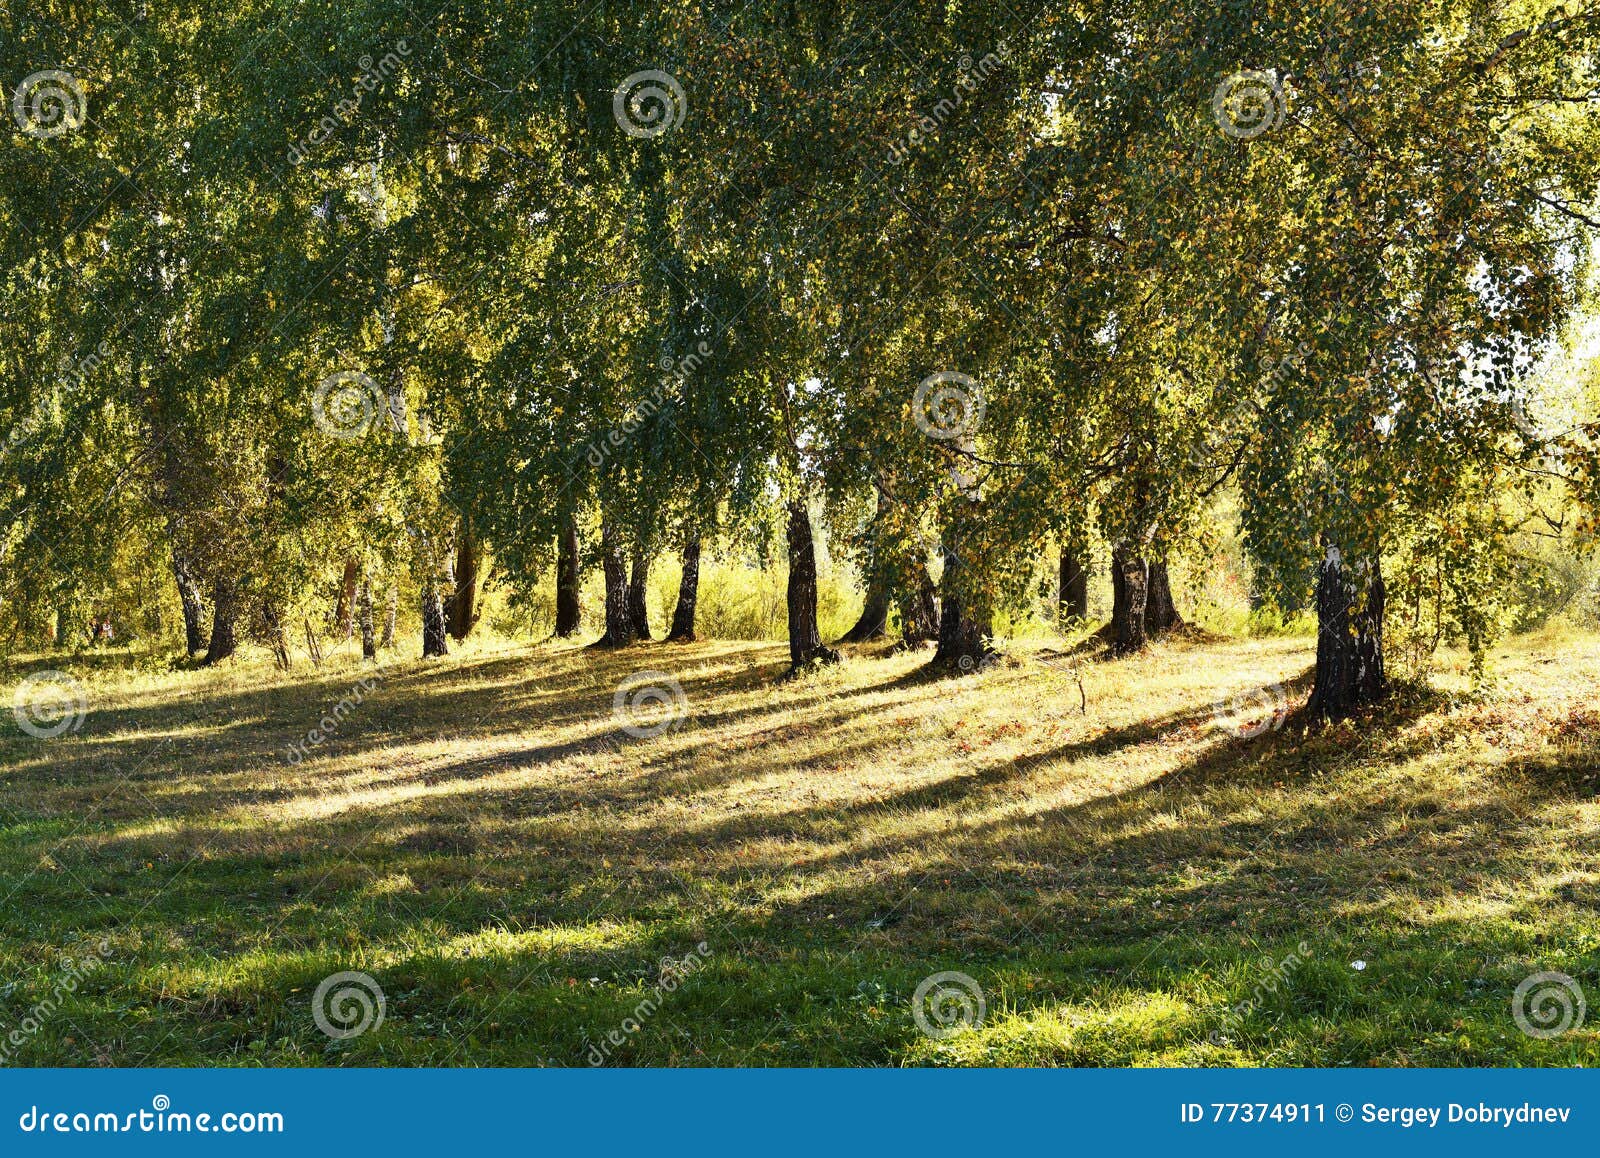 Yellowing Leaves of Birch Trees in the Meadow Autumn Day Stock Image ...